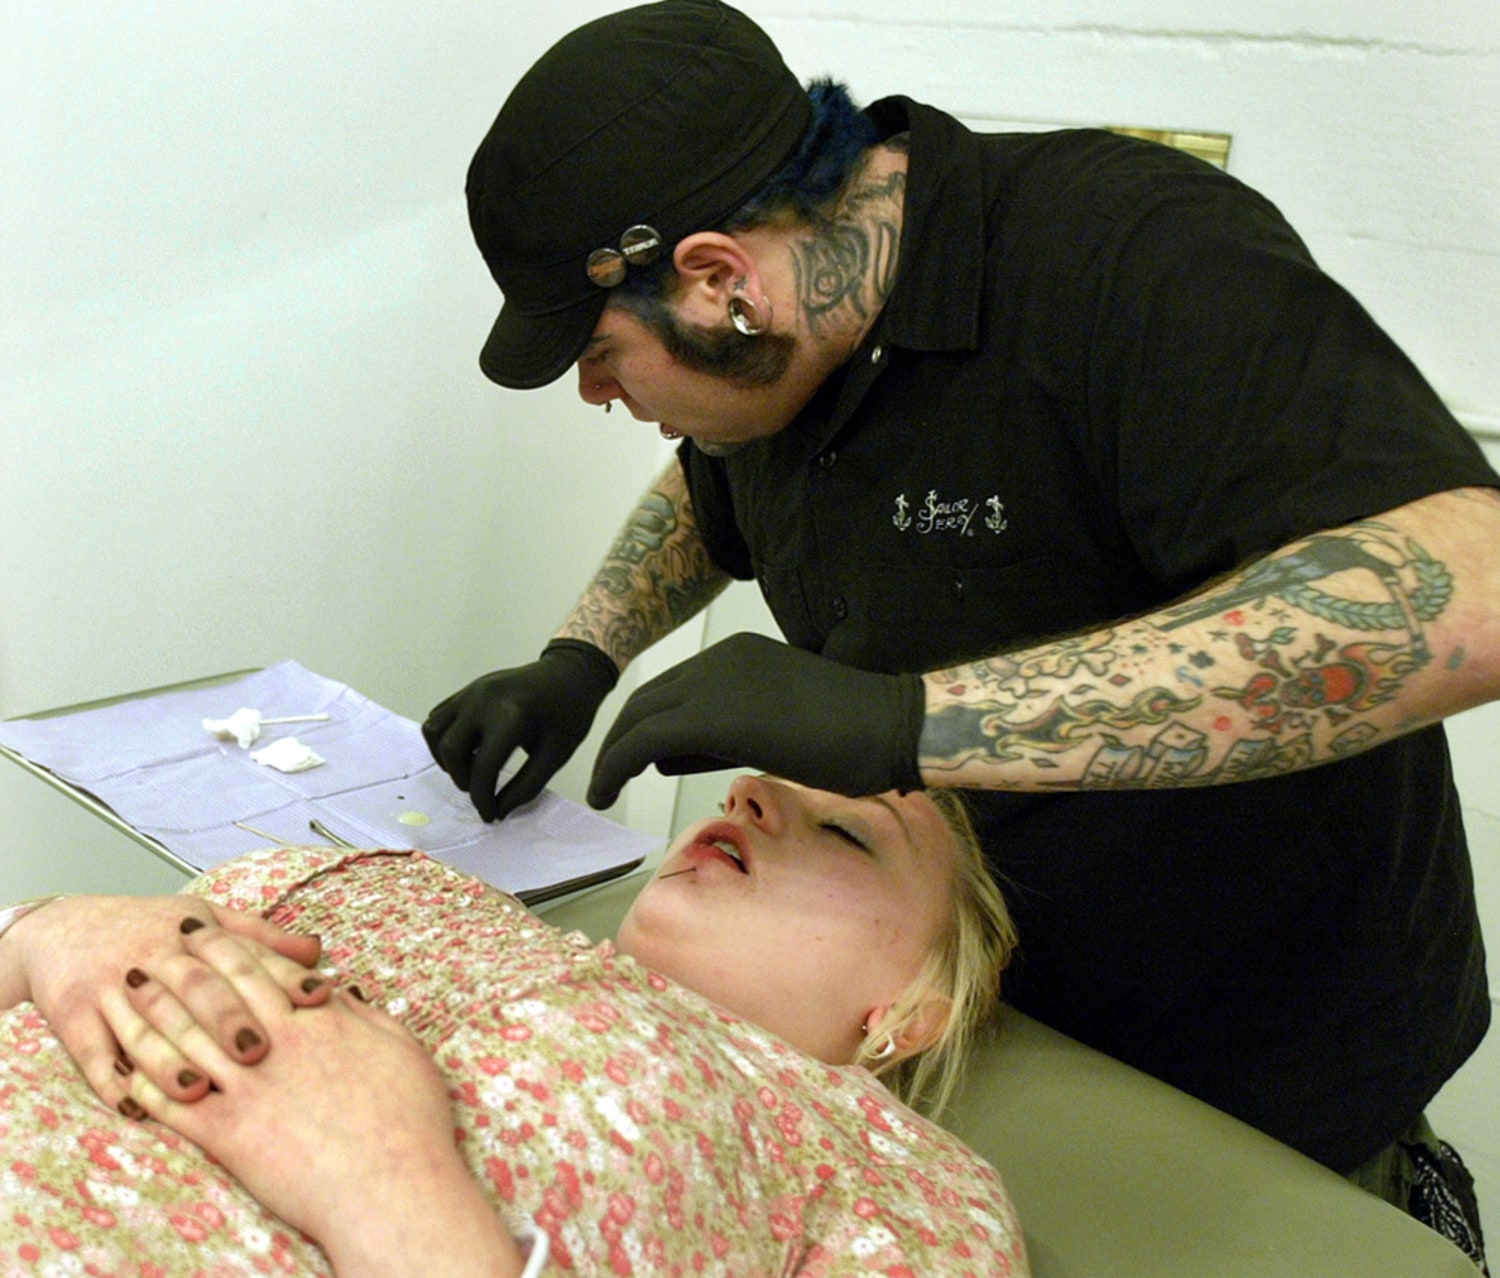 Local law enforcement varies on tattoo policies  WCYB